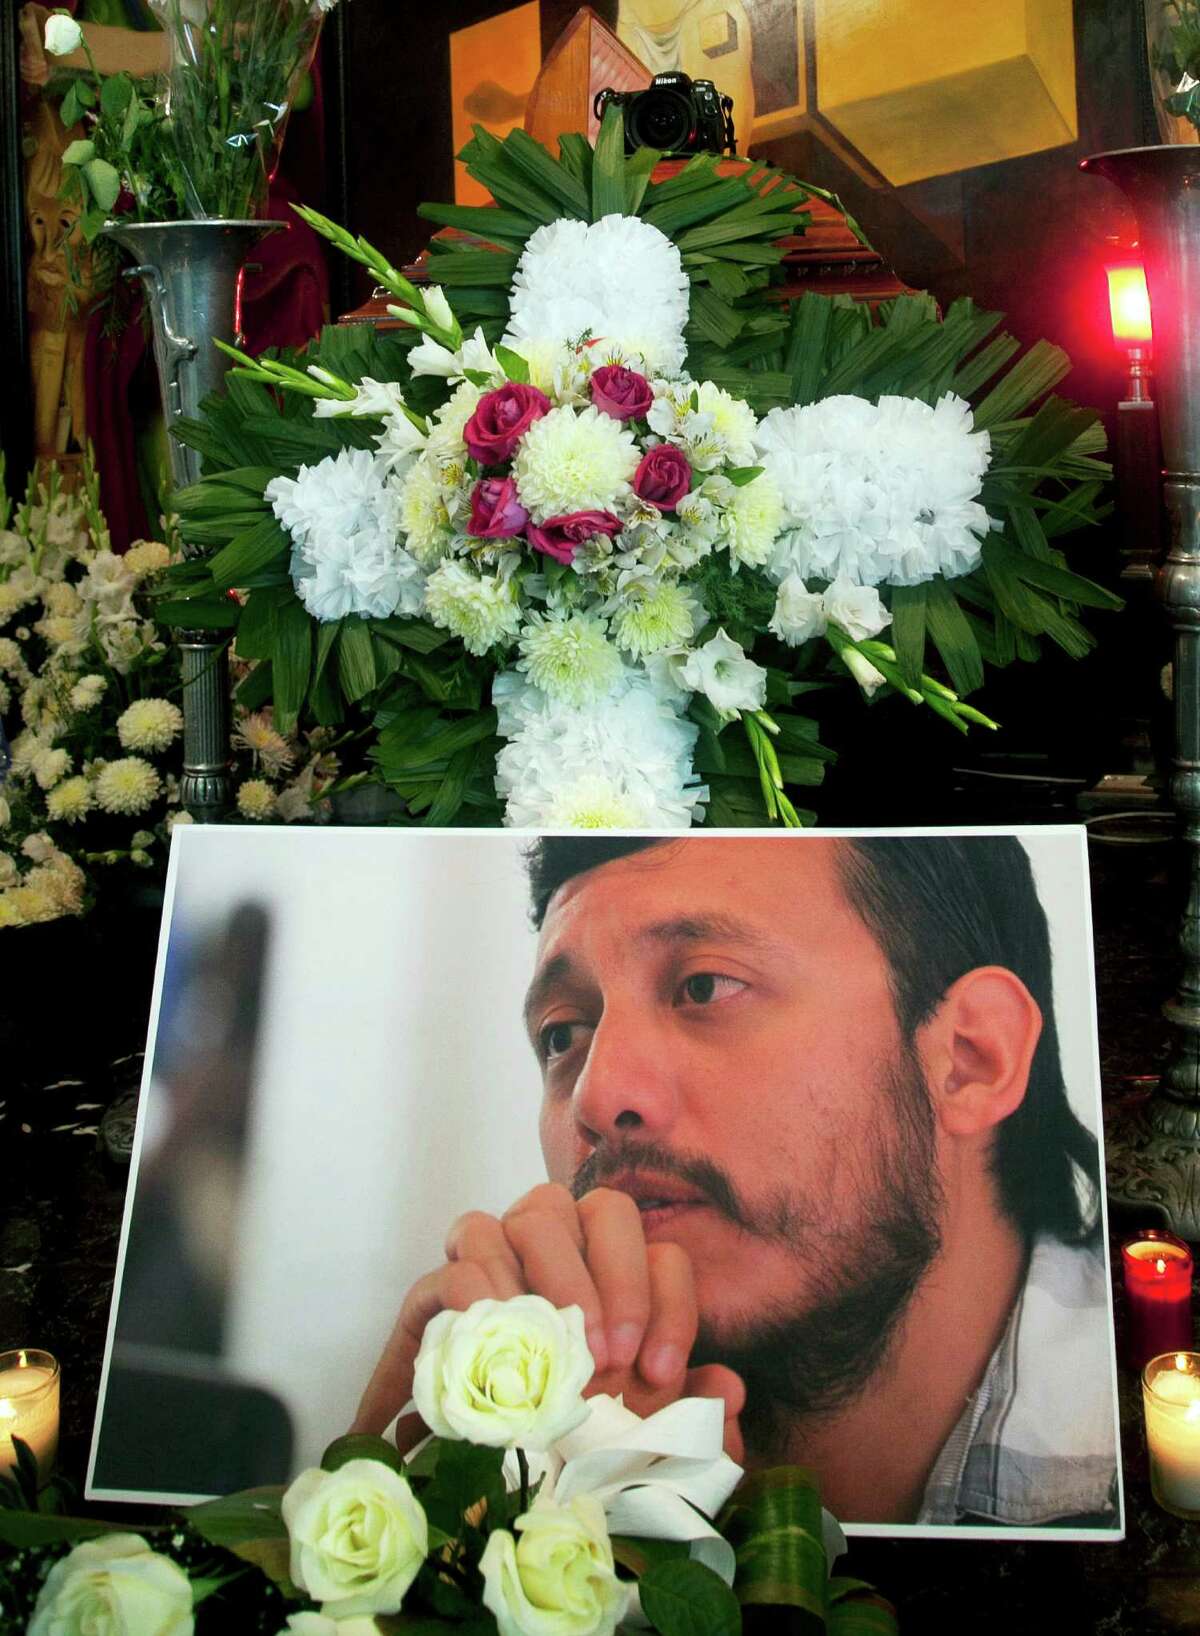 A photo of slain photojournal- ist Ruben Espinosa is in front of his casket in a funeral home in Mexico City.